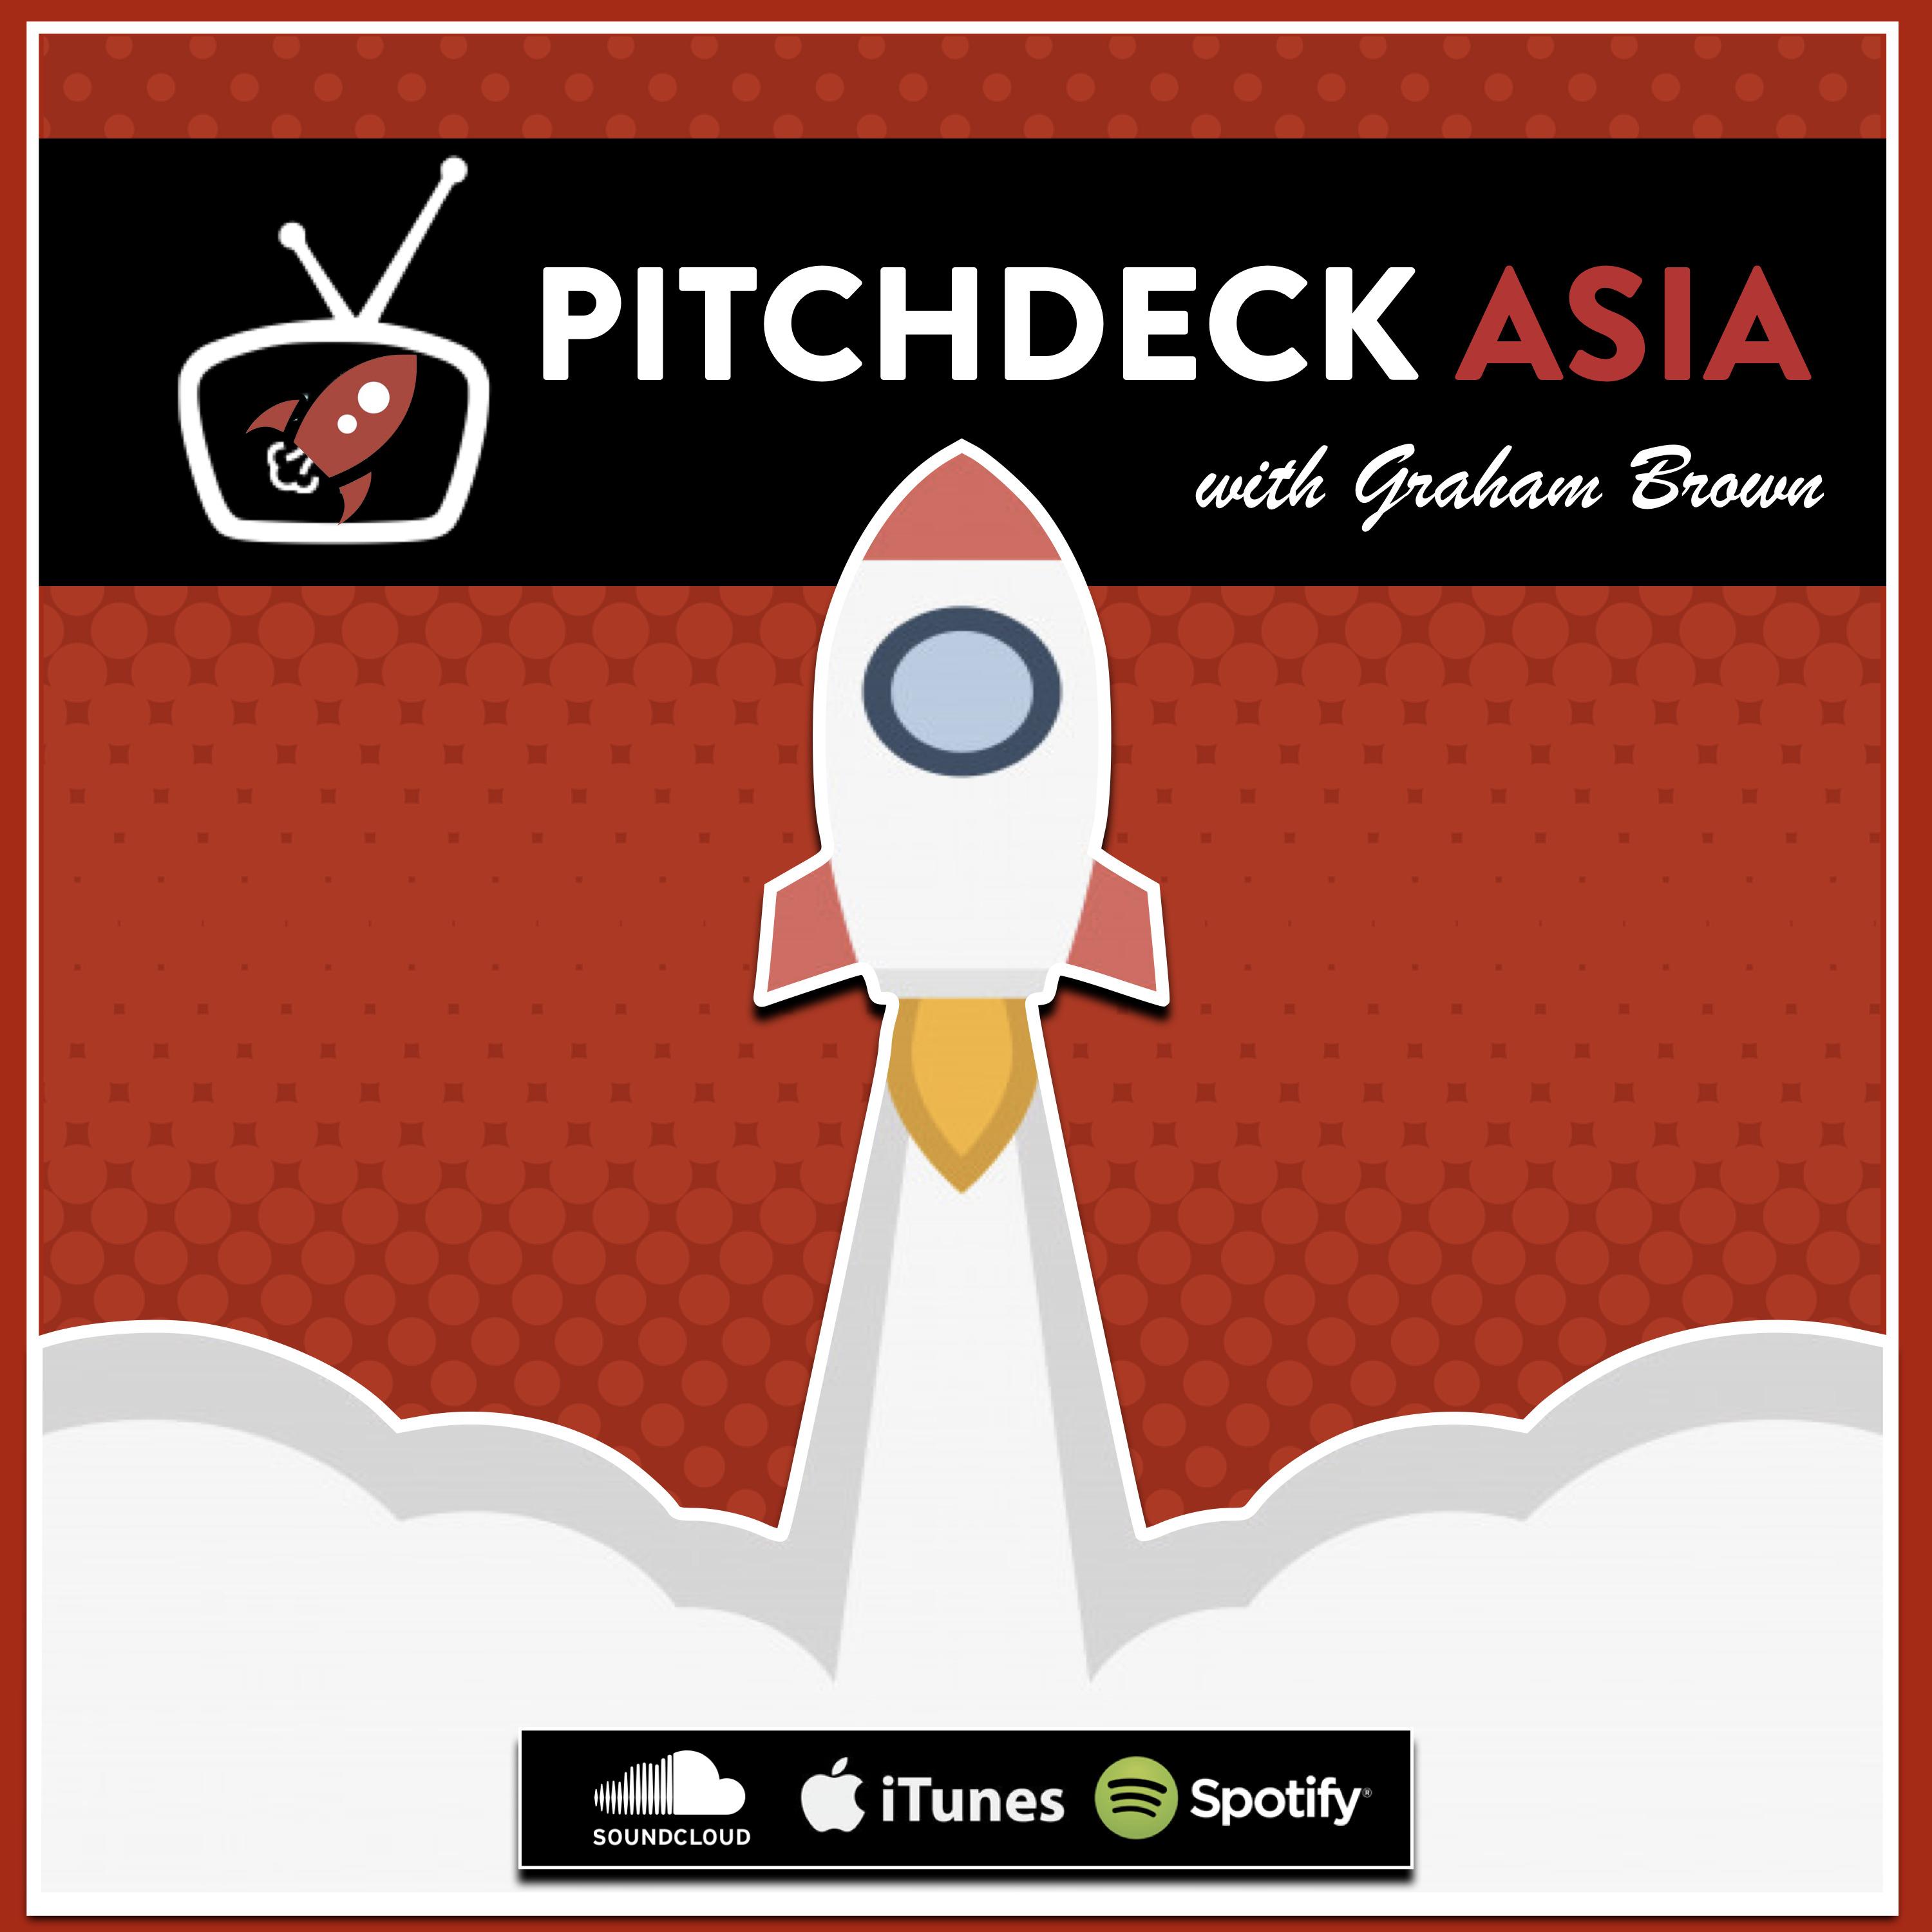 Pitchdeck Asia